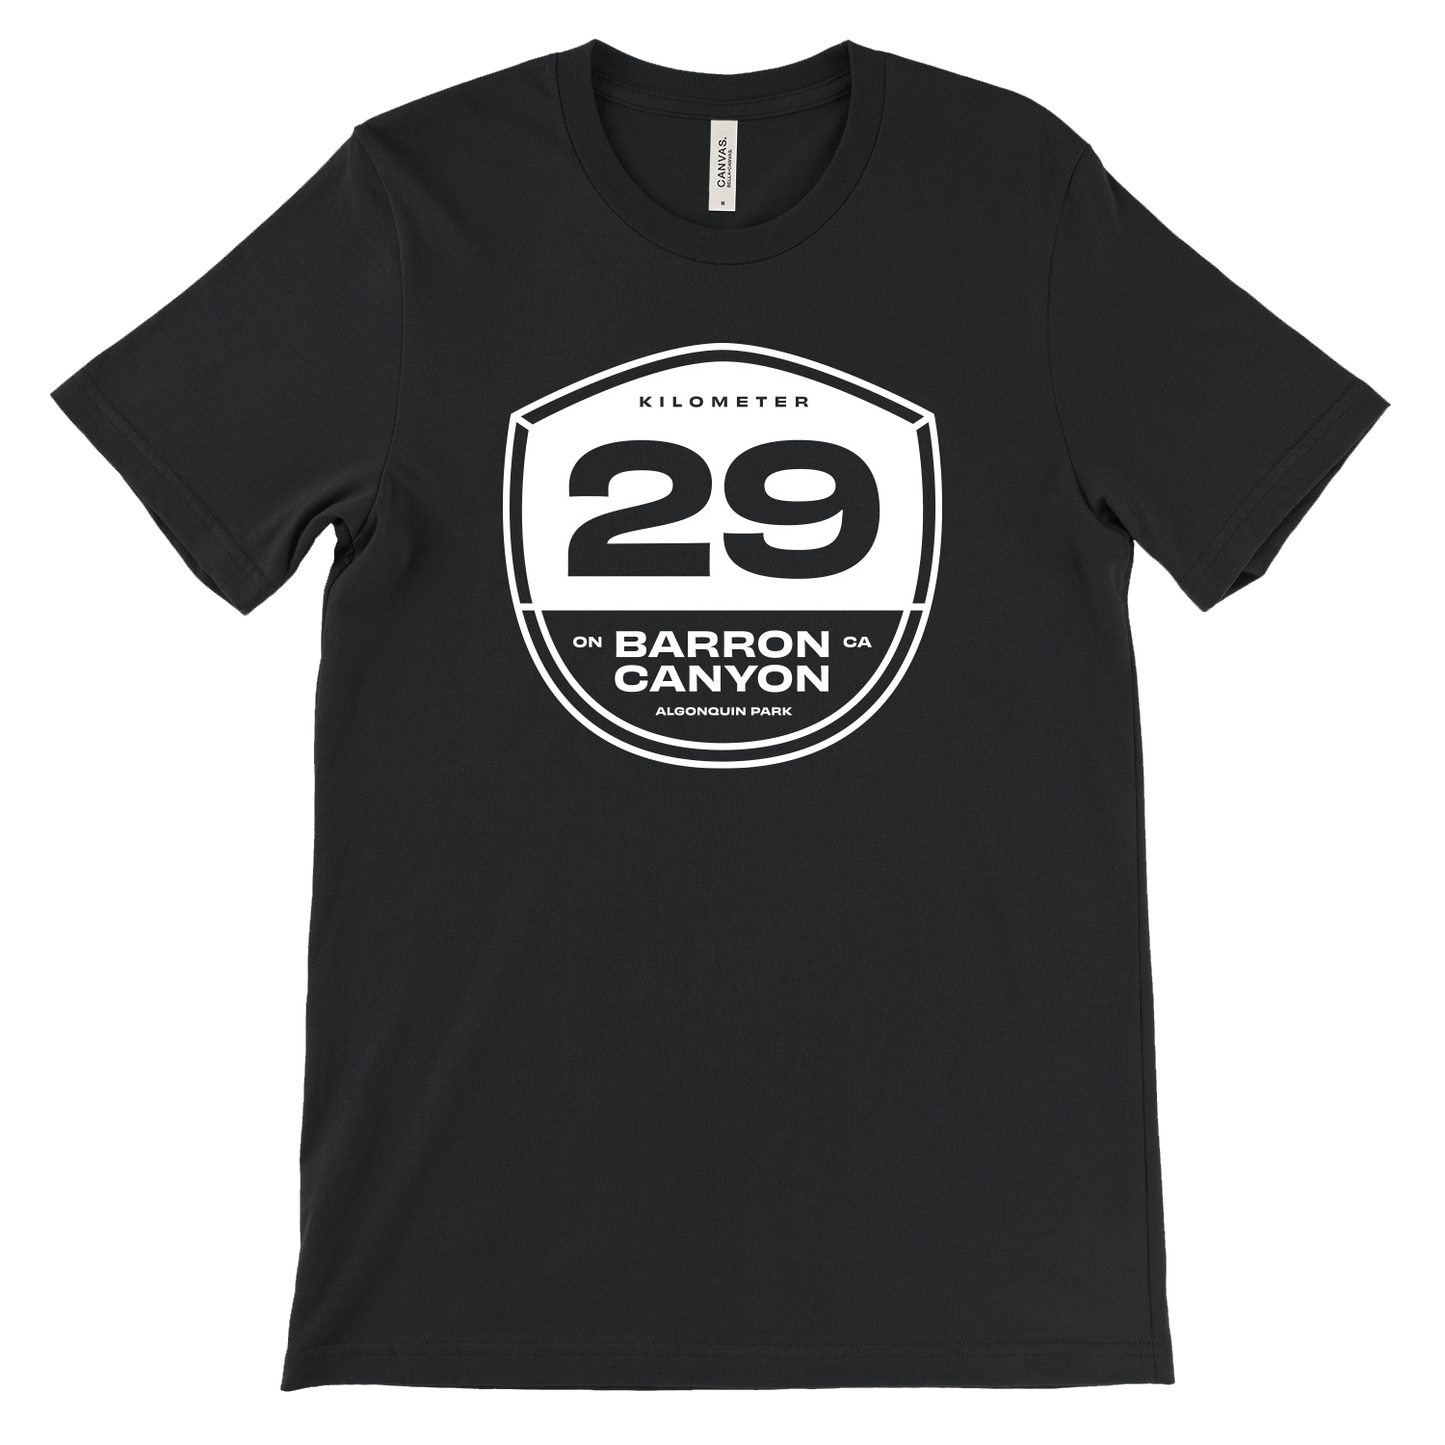 Barron Canyon Trail black road trip t-shirt with white graphic